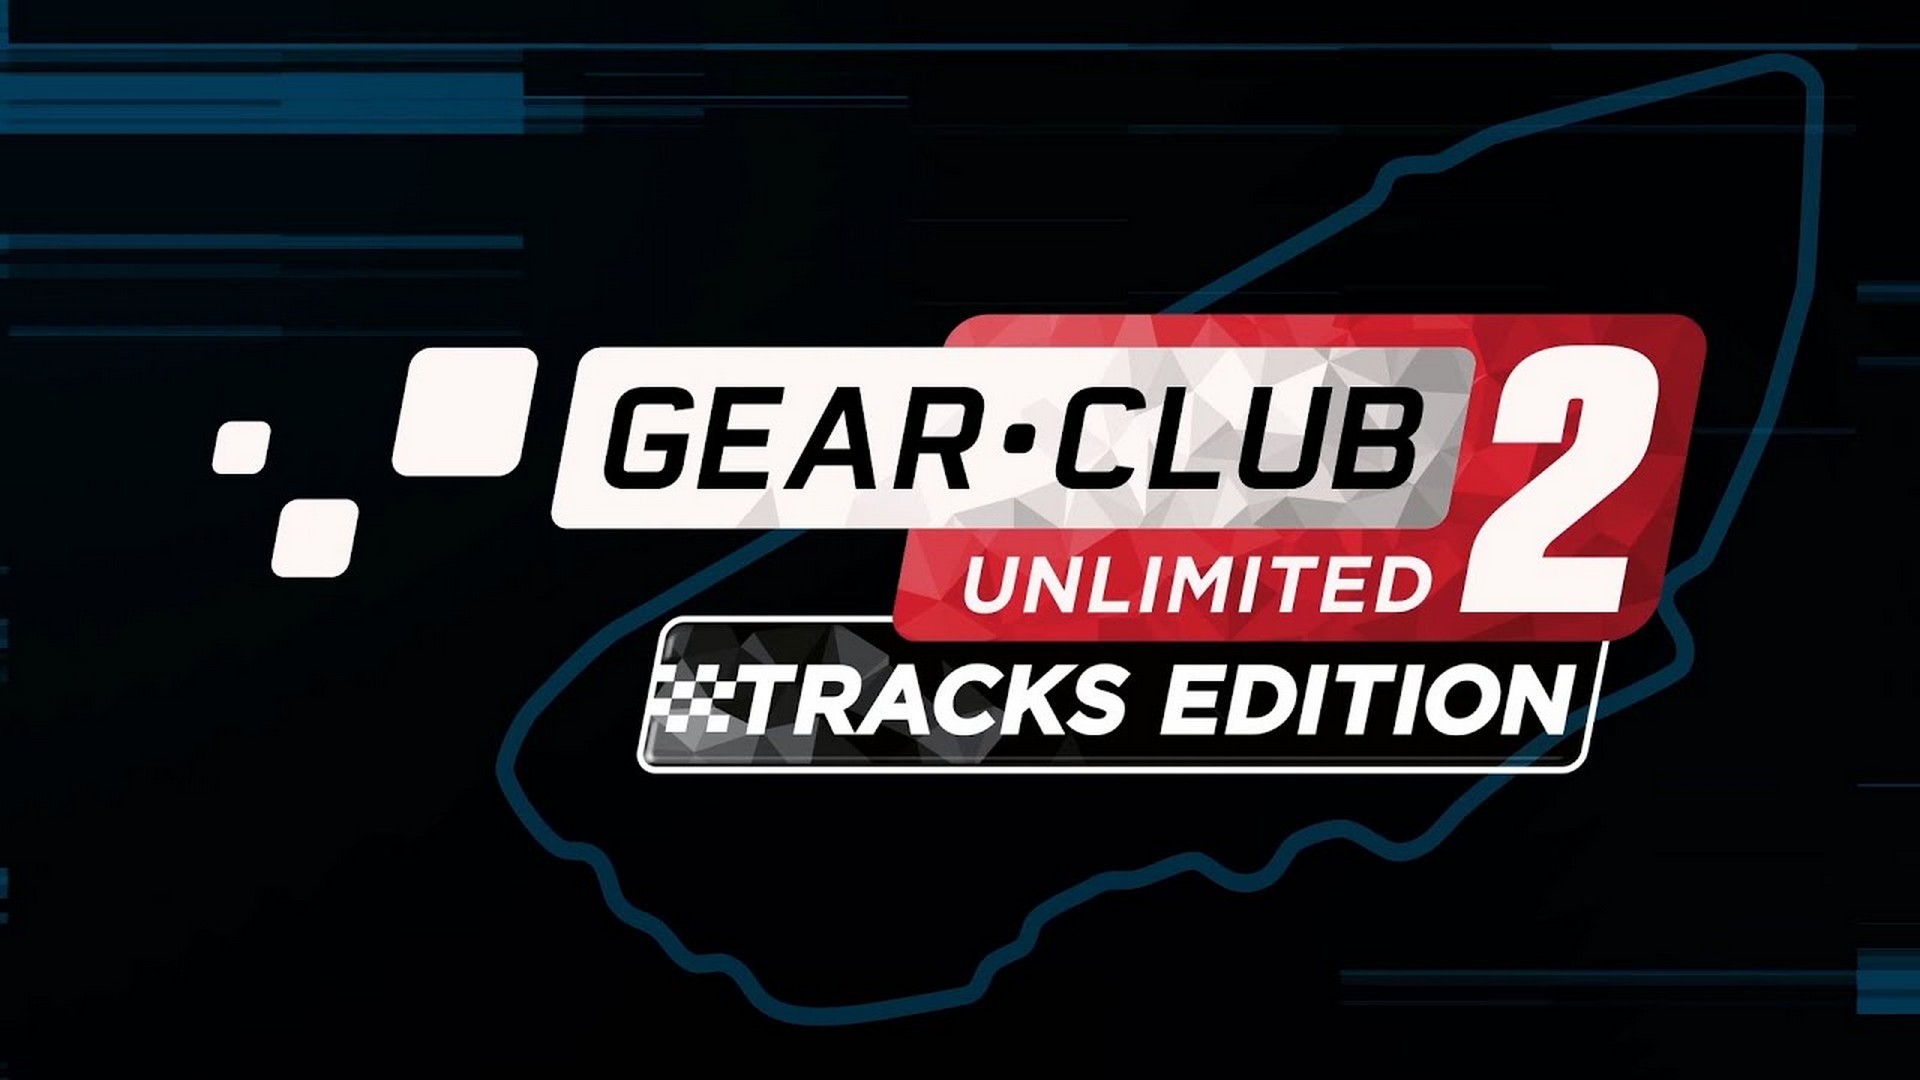 Gear.Club Unlimited 2 – Tracks Edition Is Now Available In Australia on Nintendo Switch